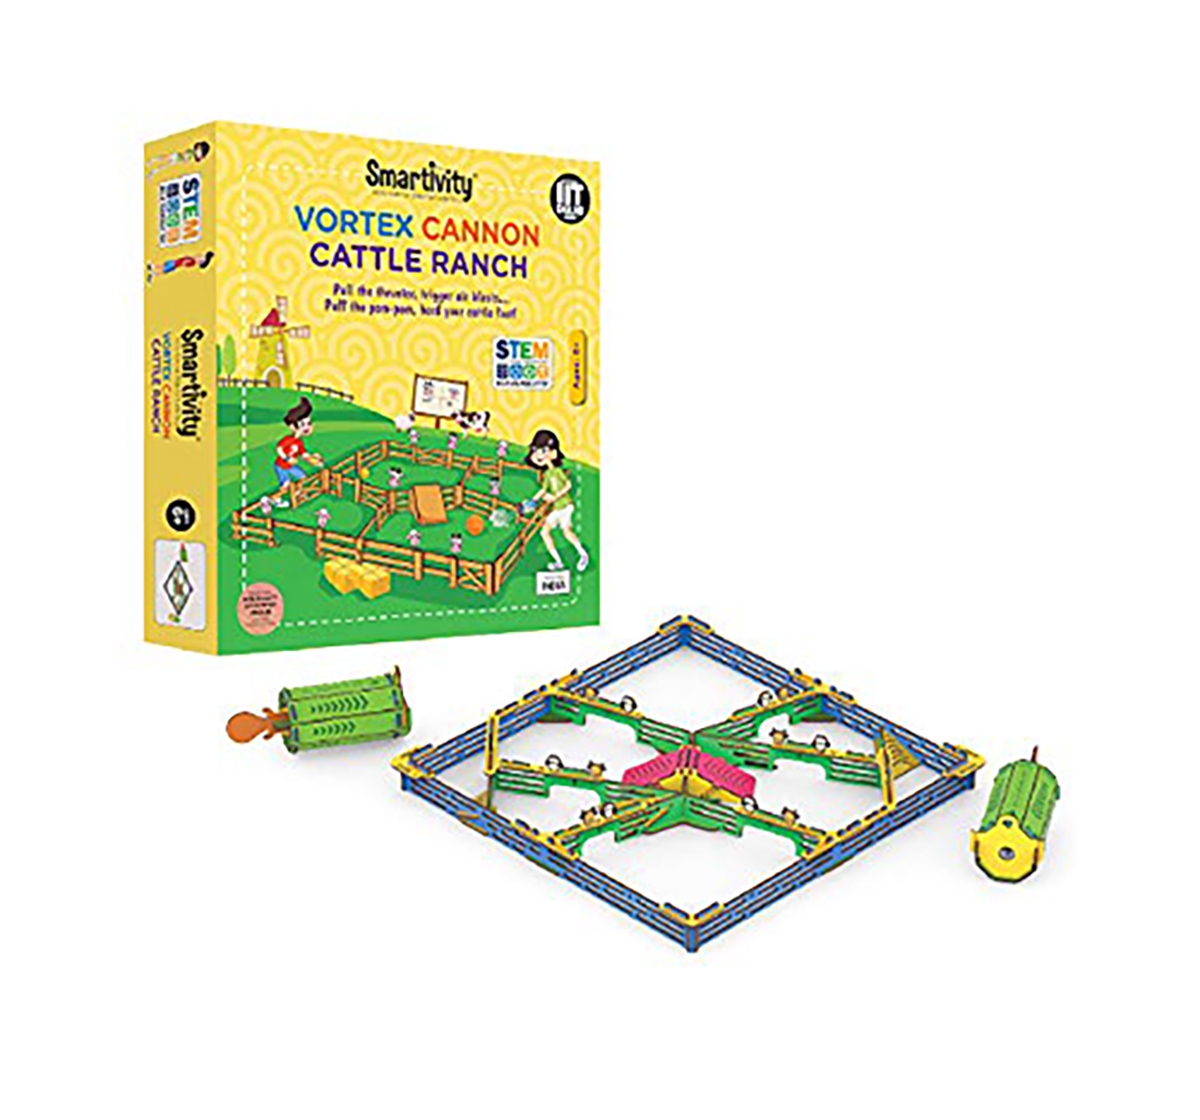 Smartivity | Smartivity Vortex Cannon Cattle Ranch: Stem, Learning, Educational and Construction Activity Toy Gift for Kids age 6Y+ 